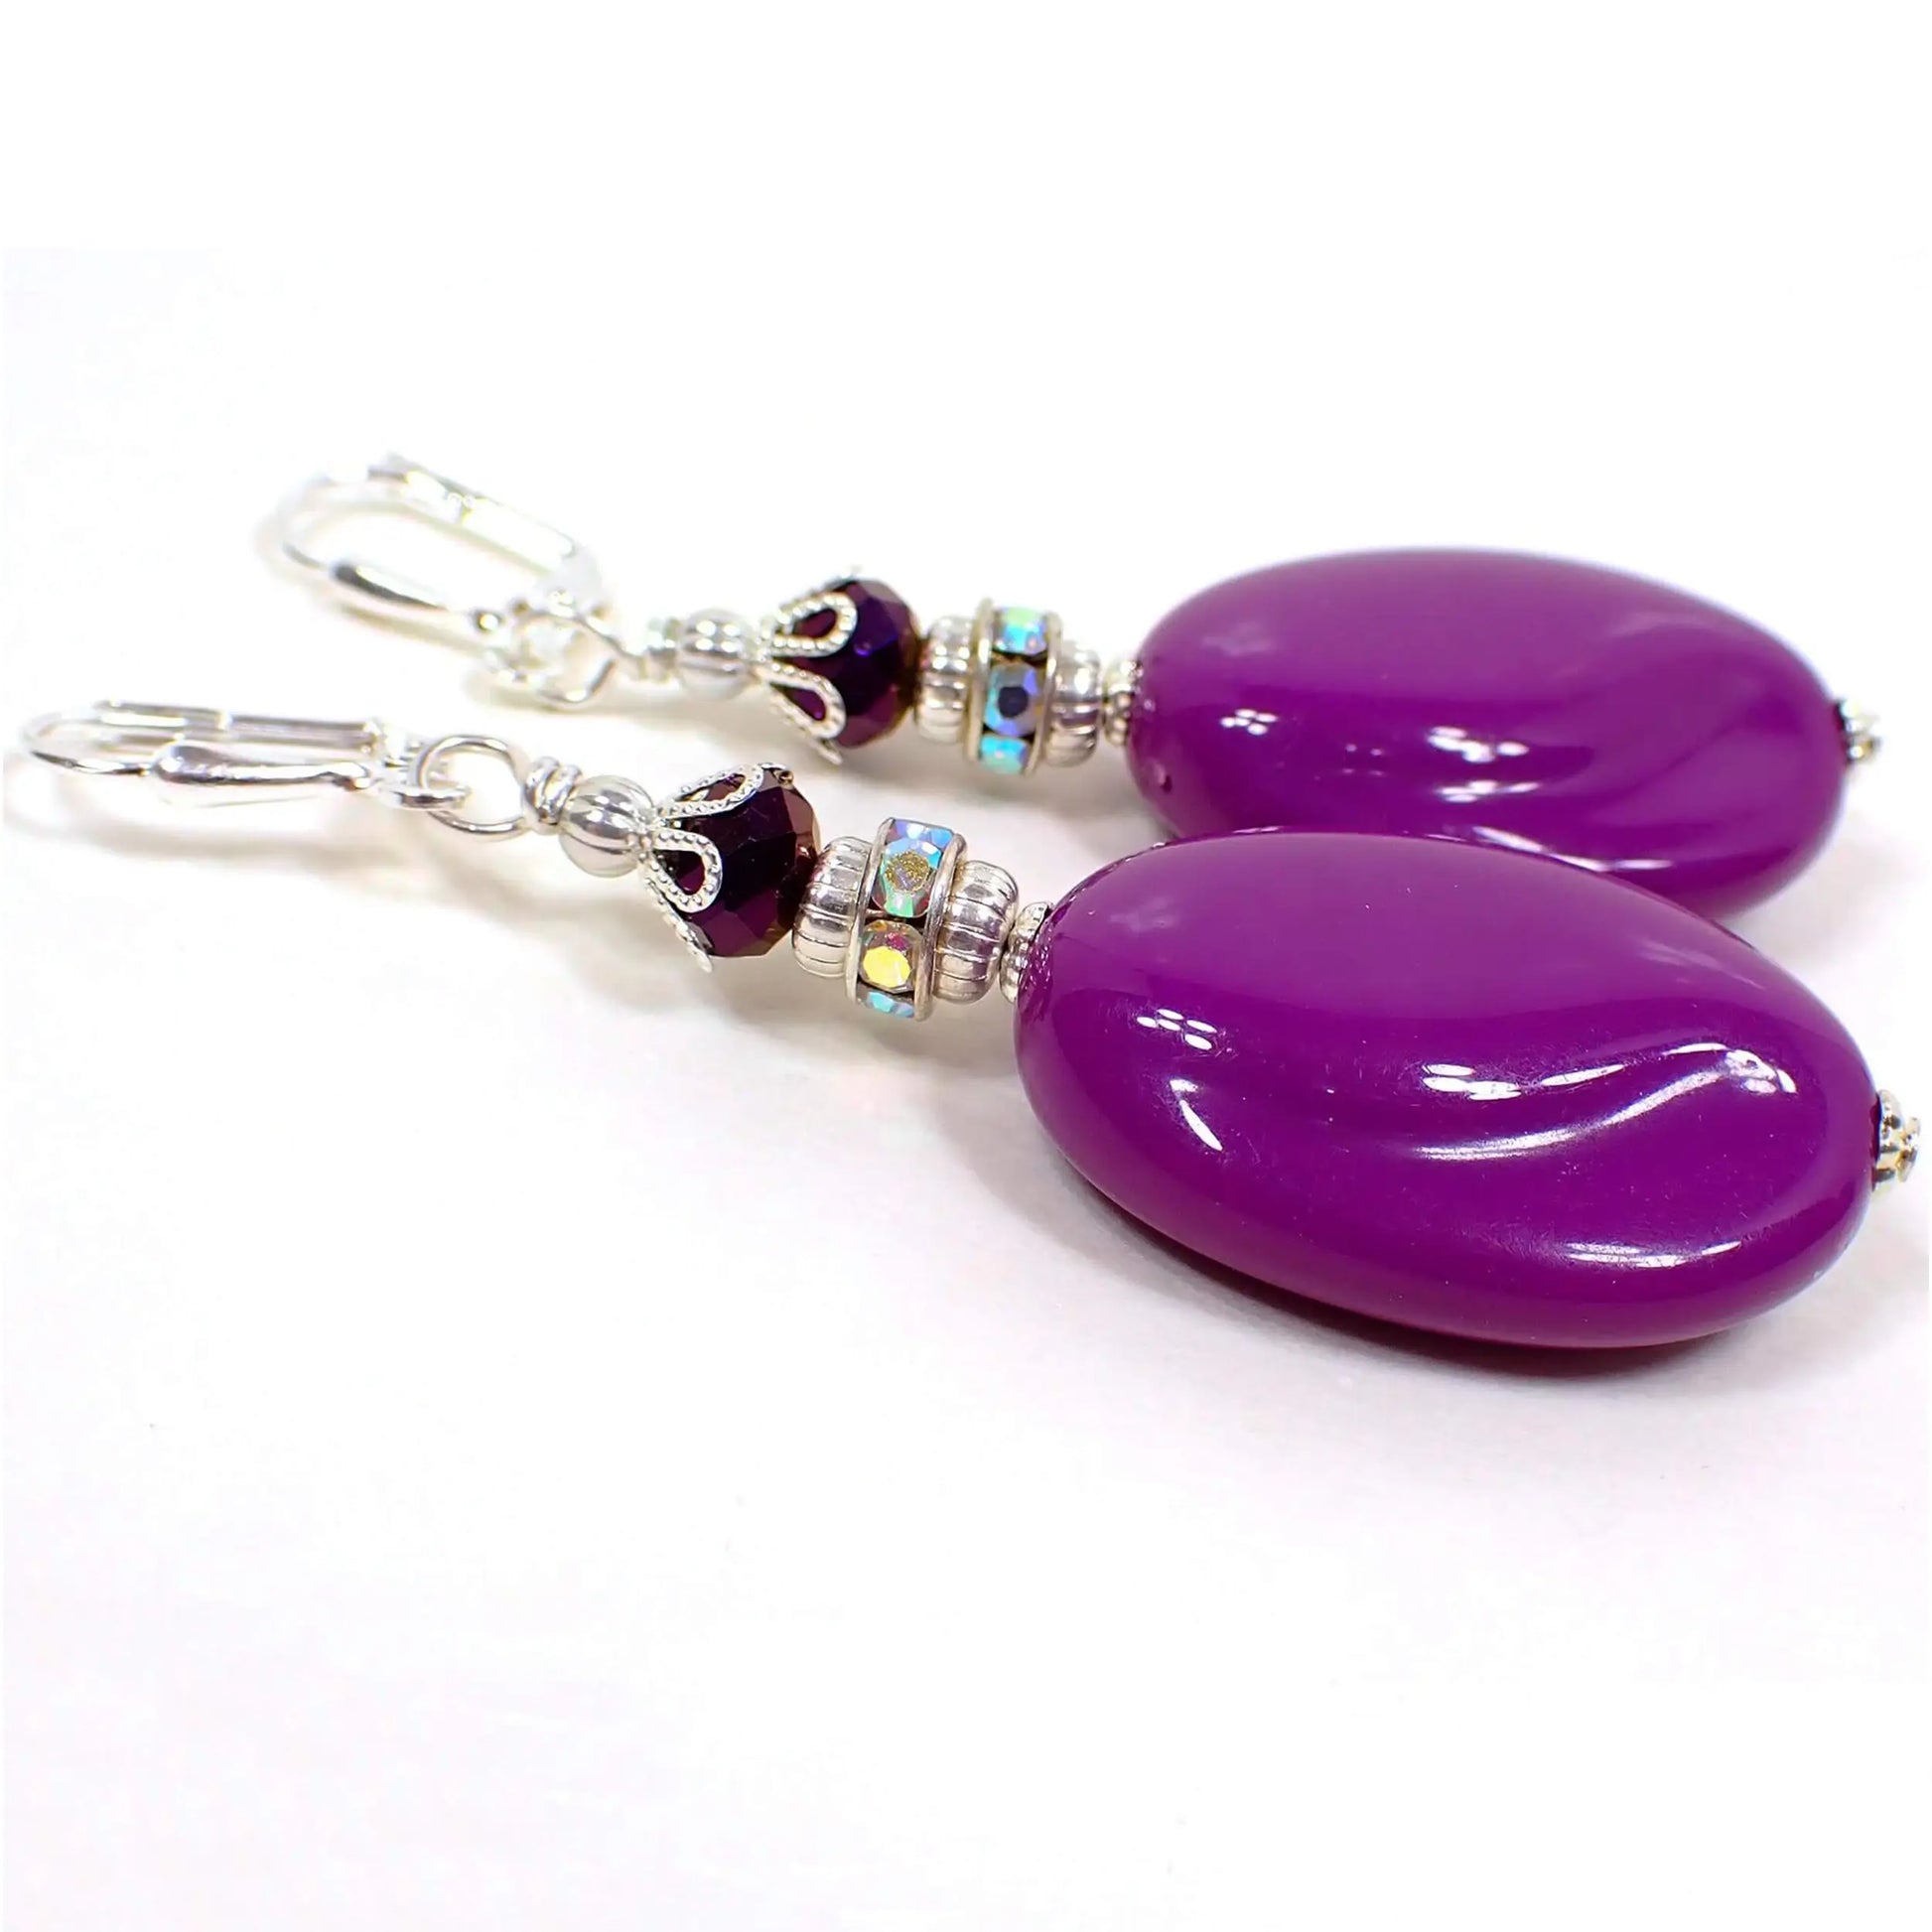 Angled view of the handmade large oval drop earrings made with vintage lucite beads. The metal is silver plated in color. There are metallic purple faceted glass beads at the top. In the middle are beads with AB clear rhinestones all the way around. The bottom lucite beads are a bright purple color and are puffy oval shaped with an indent swirl pattern towards the sides of the beads.